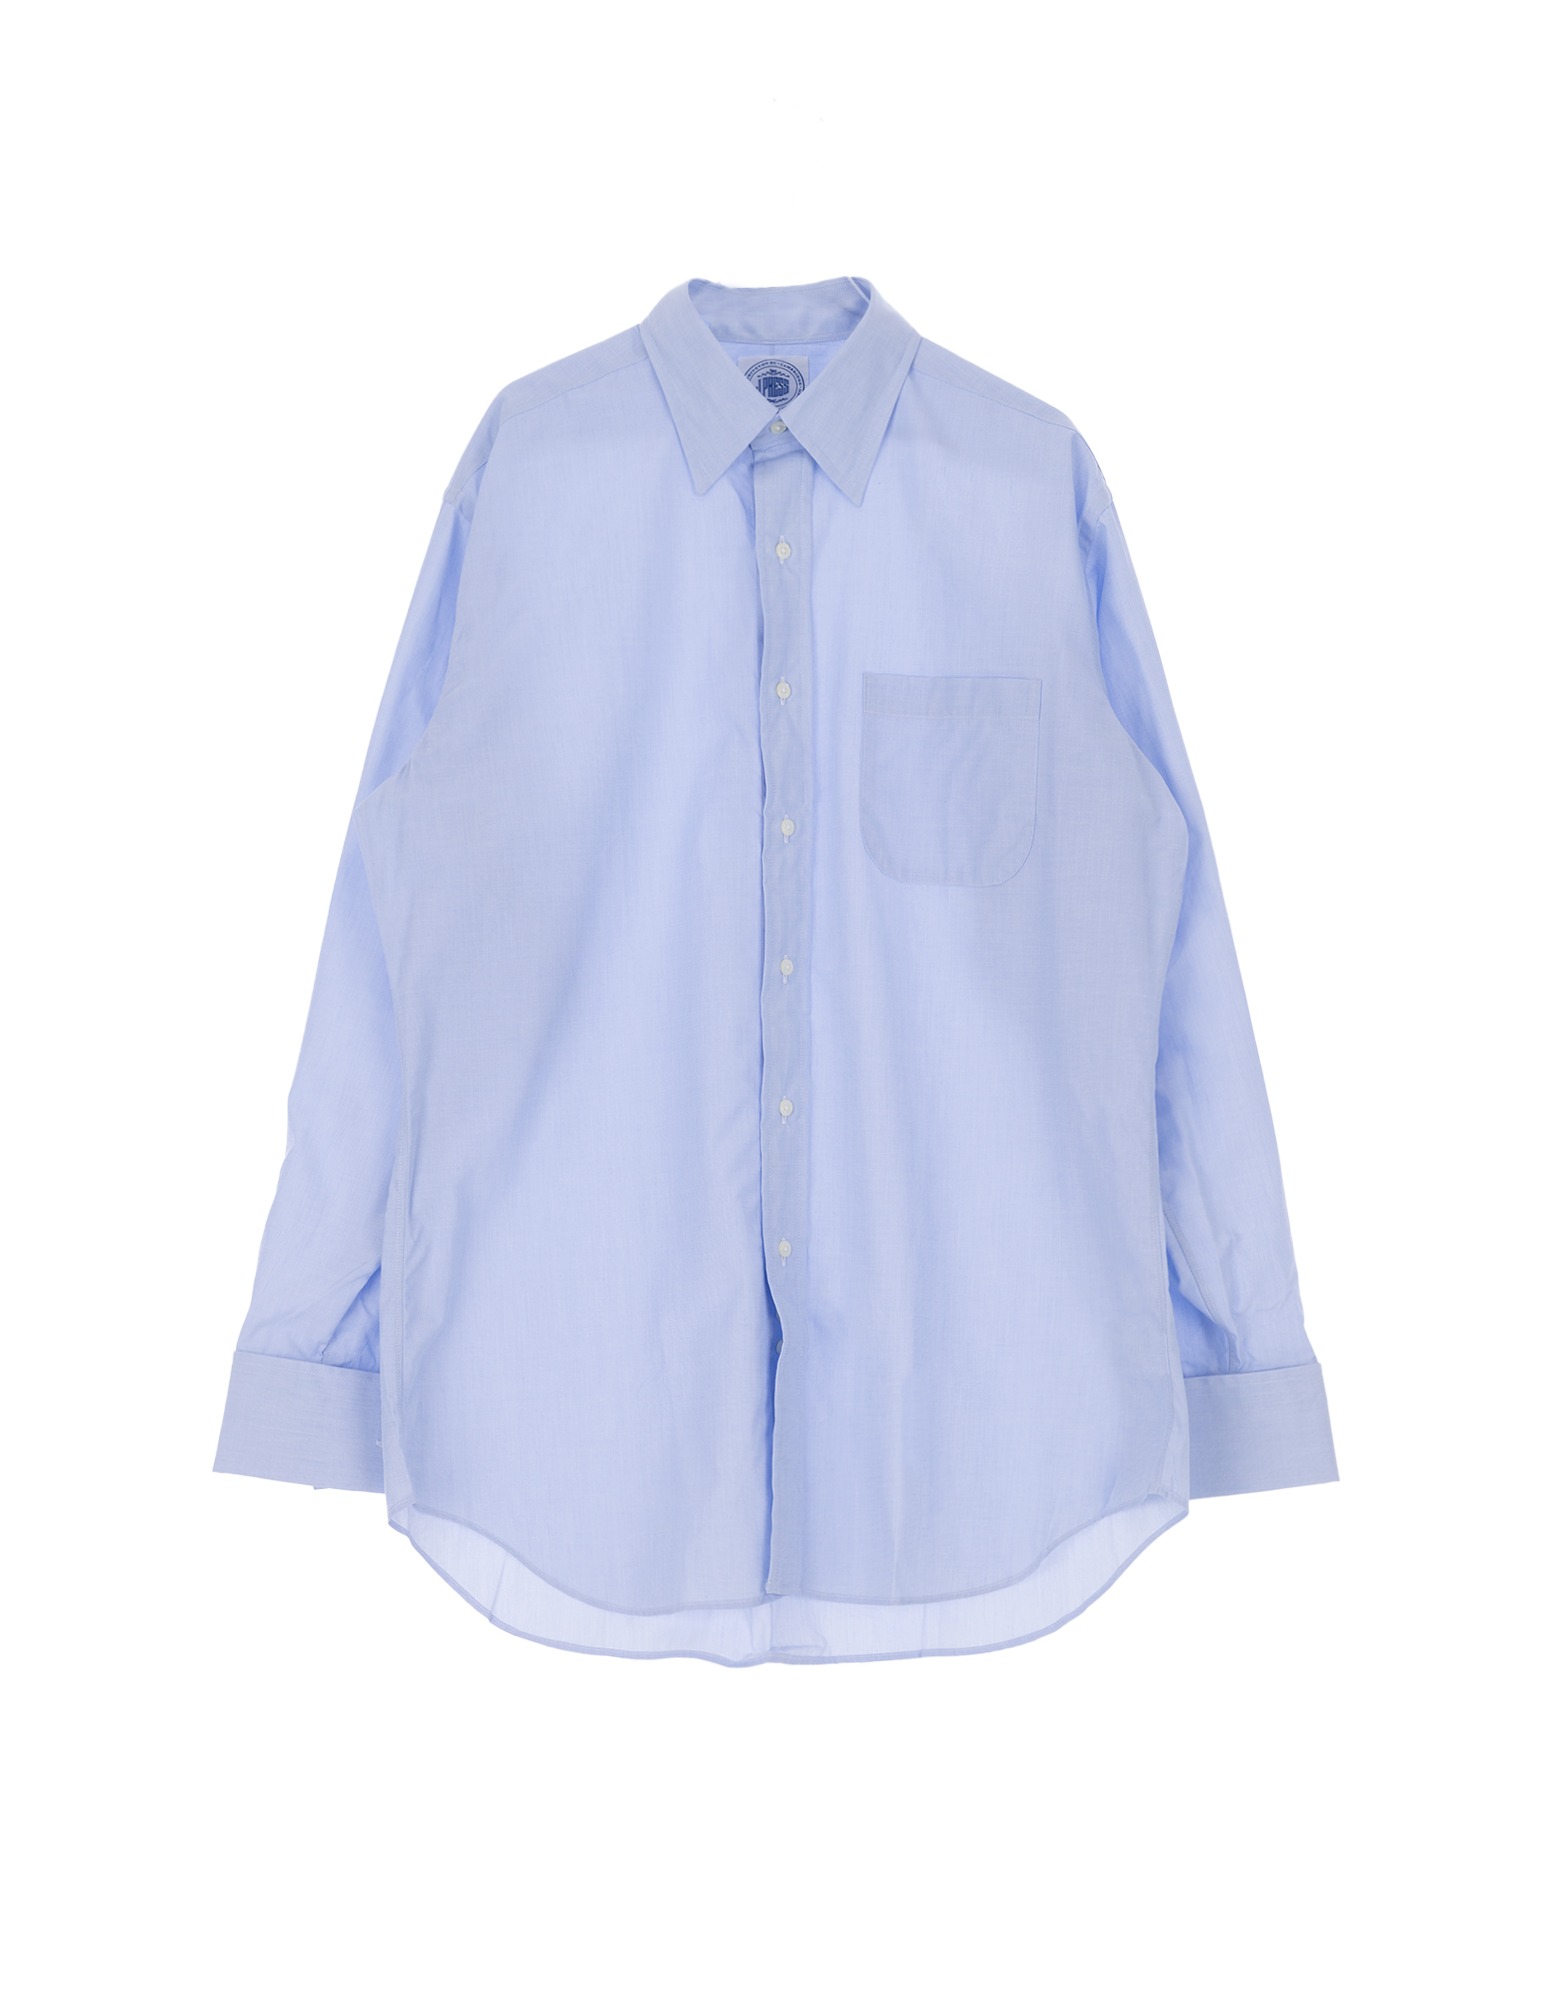 End-On-End Shirt With French Cuff Shirt (Blue)